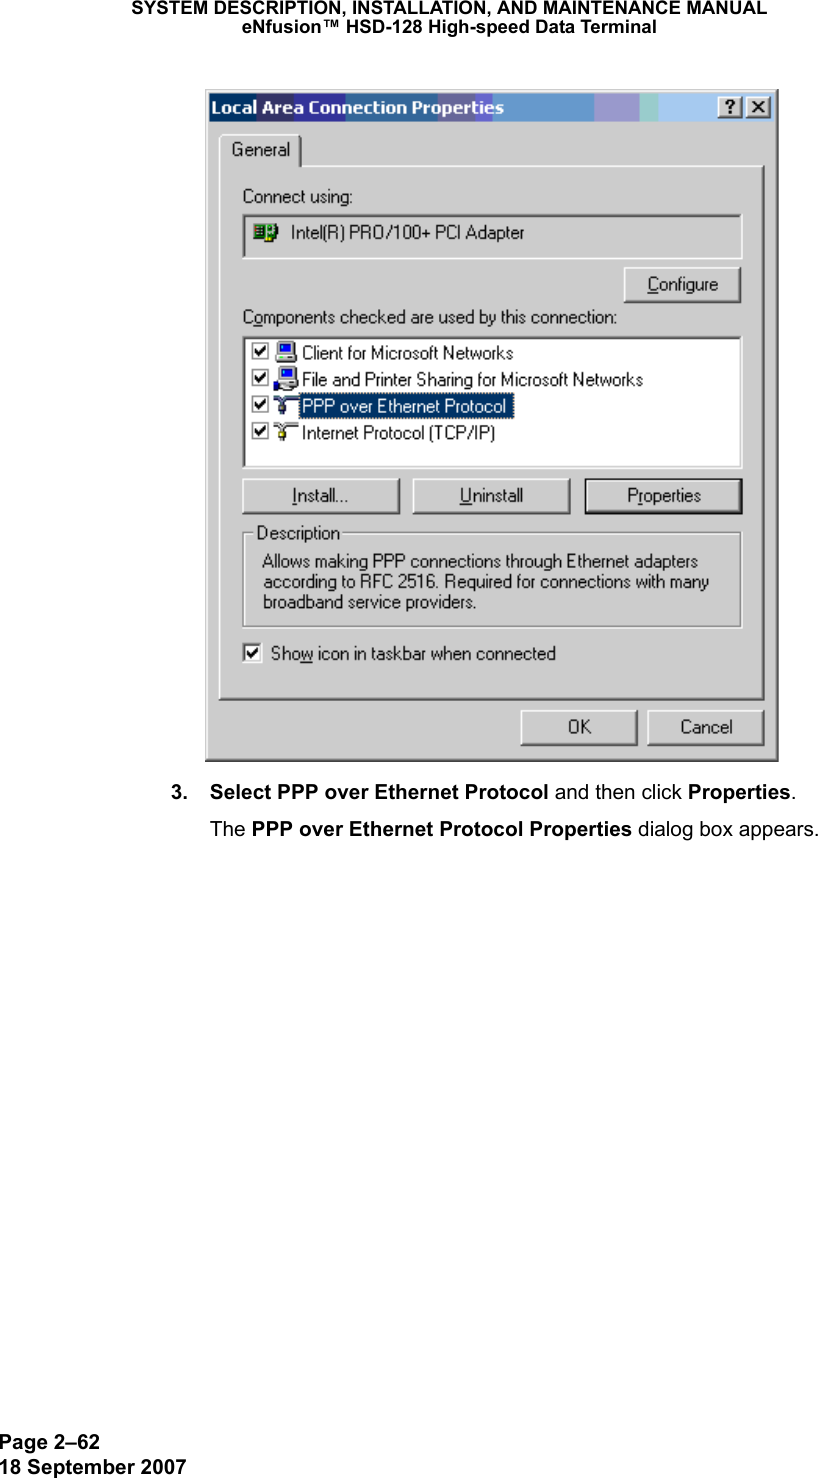 Page 2–6218 September 2007SYSTEM DESCRIPTION, INSTALLATION, AND MAINTENANCE MANUALeNfusion™ HSD-128 High-speed Data Terminal 3. Select PPP over Ethernet Protocol and then click Properties.The PPP over Ethernet Protocol Properties dialog box appears.